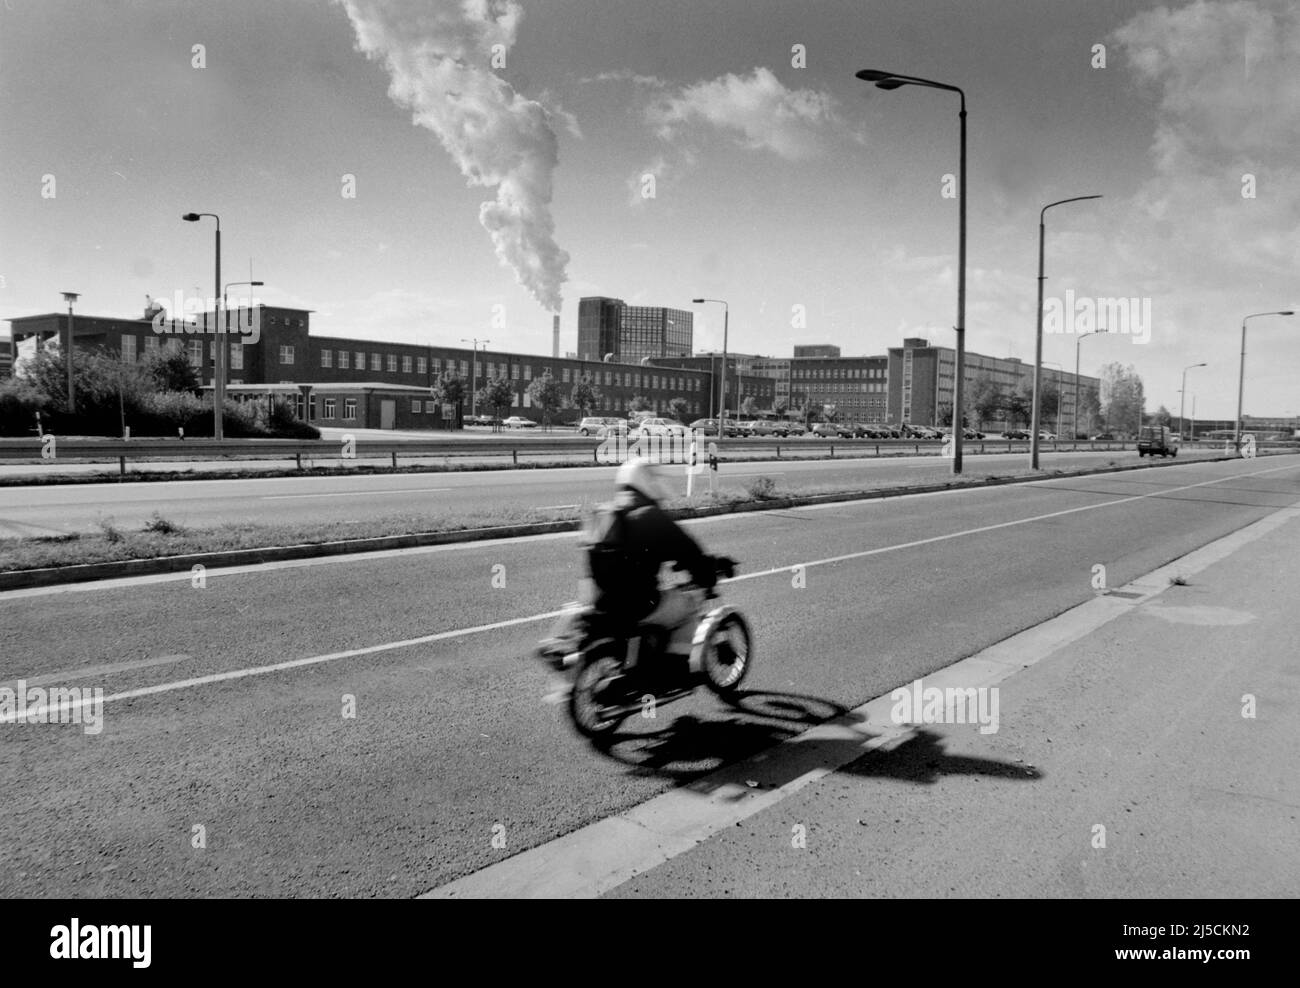 Schkopau, DEU, 09.09.1996 - A moped rider drives past the former VEB Chemische Werke Buna. The Buna plant was one of the five largest industrial combines in the GDR. In 1995, the American corporation Dow Chemical took over large parts of the production facilities. The Schkopau plant has been part of Dow Olefinverbund GmbH since 2004. [automated translation] Stock Photo